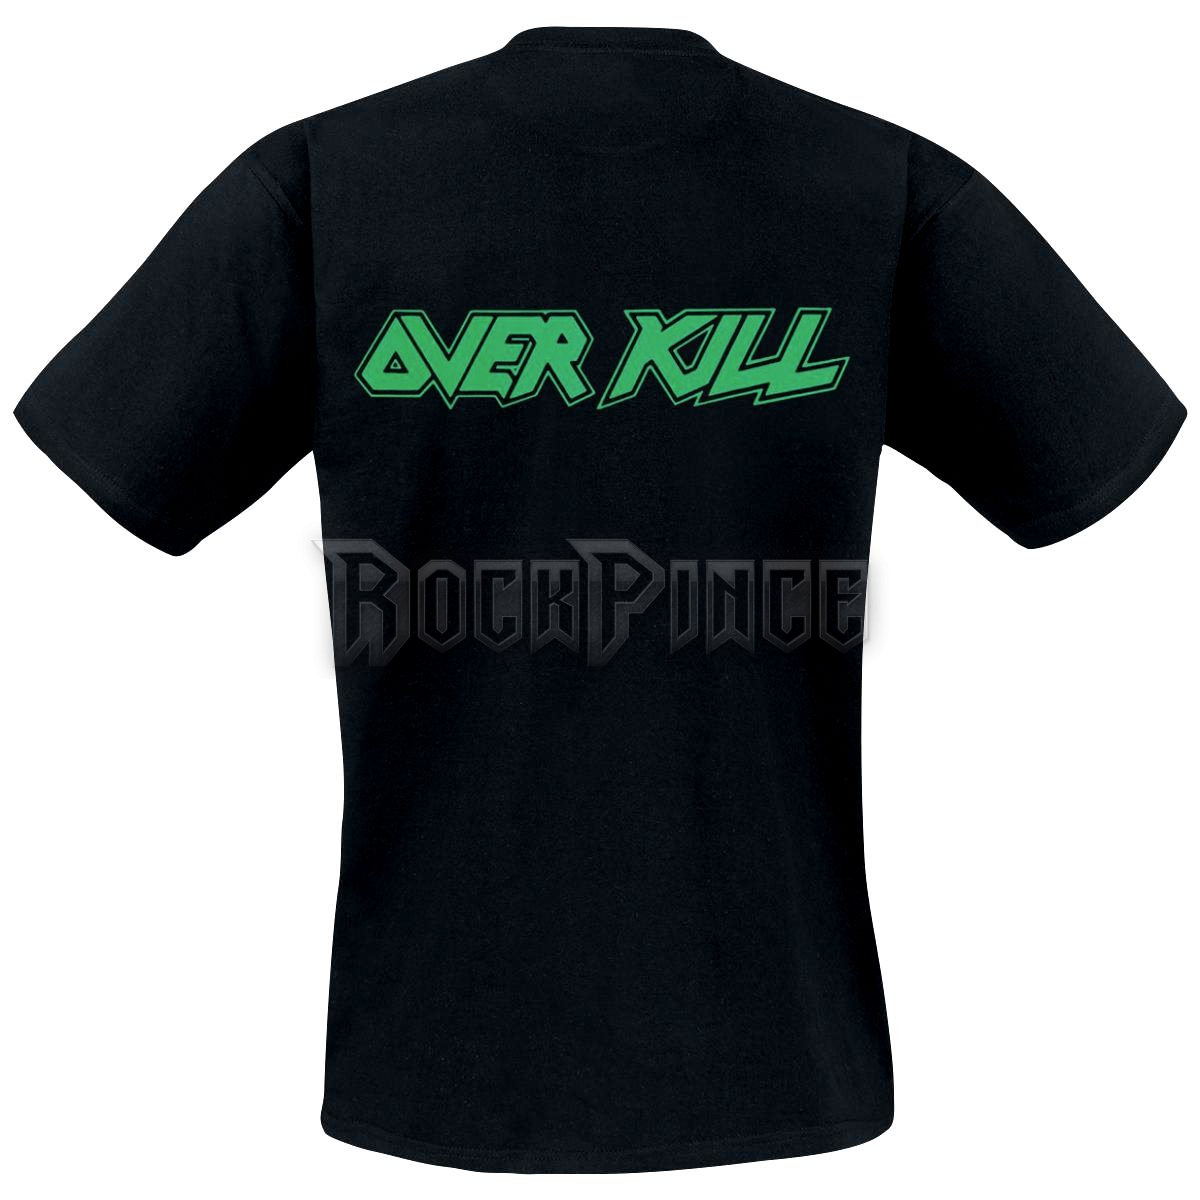 Overkill - !!!Fuck You!!! and Then Some - UNISEX PÓLÓ